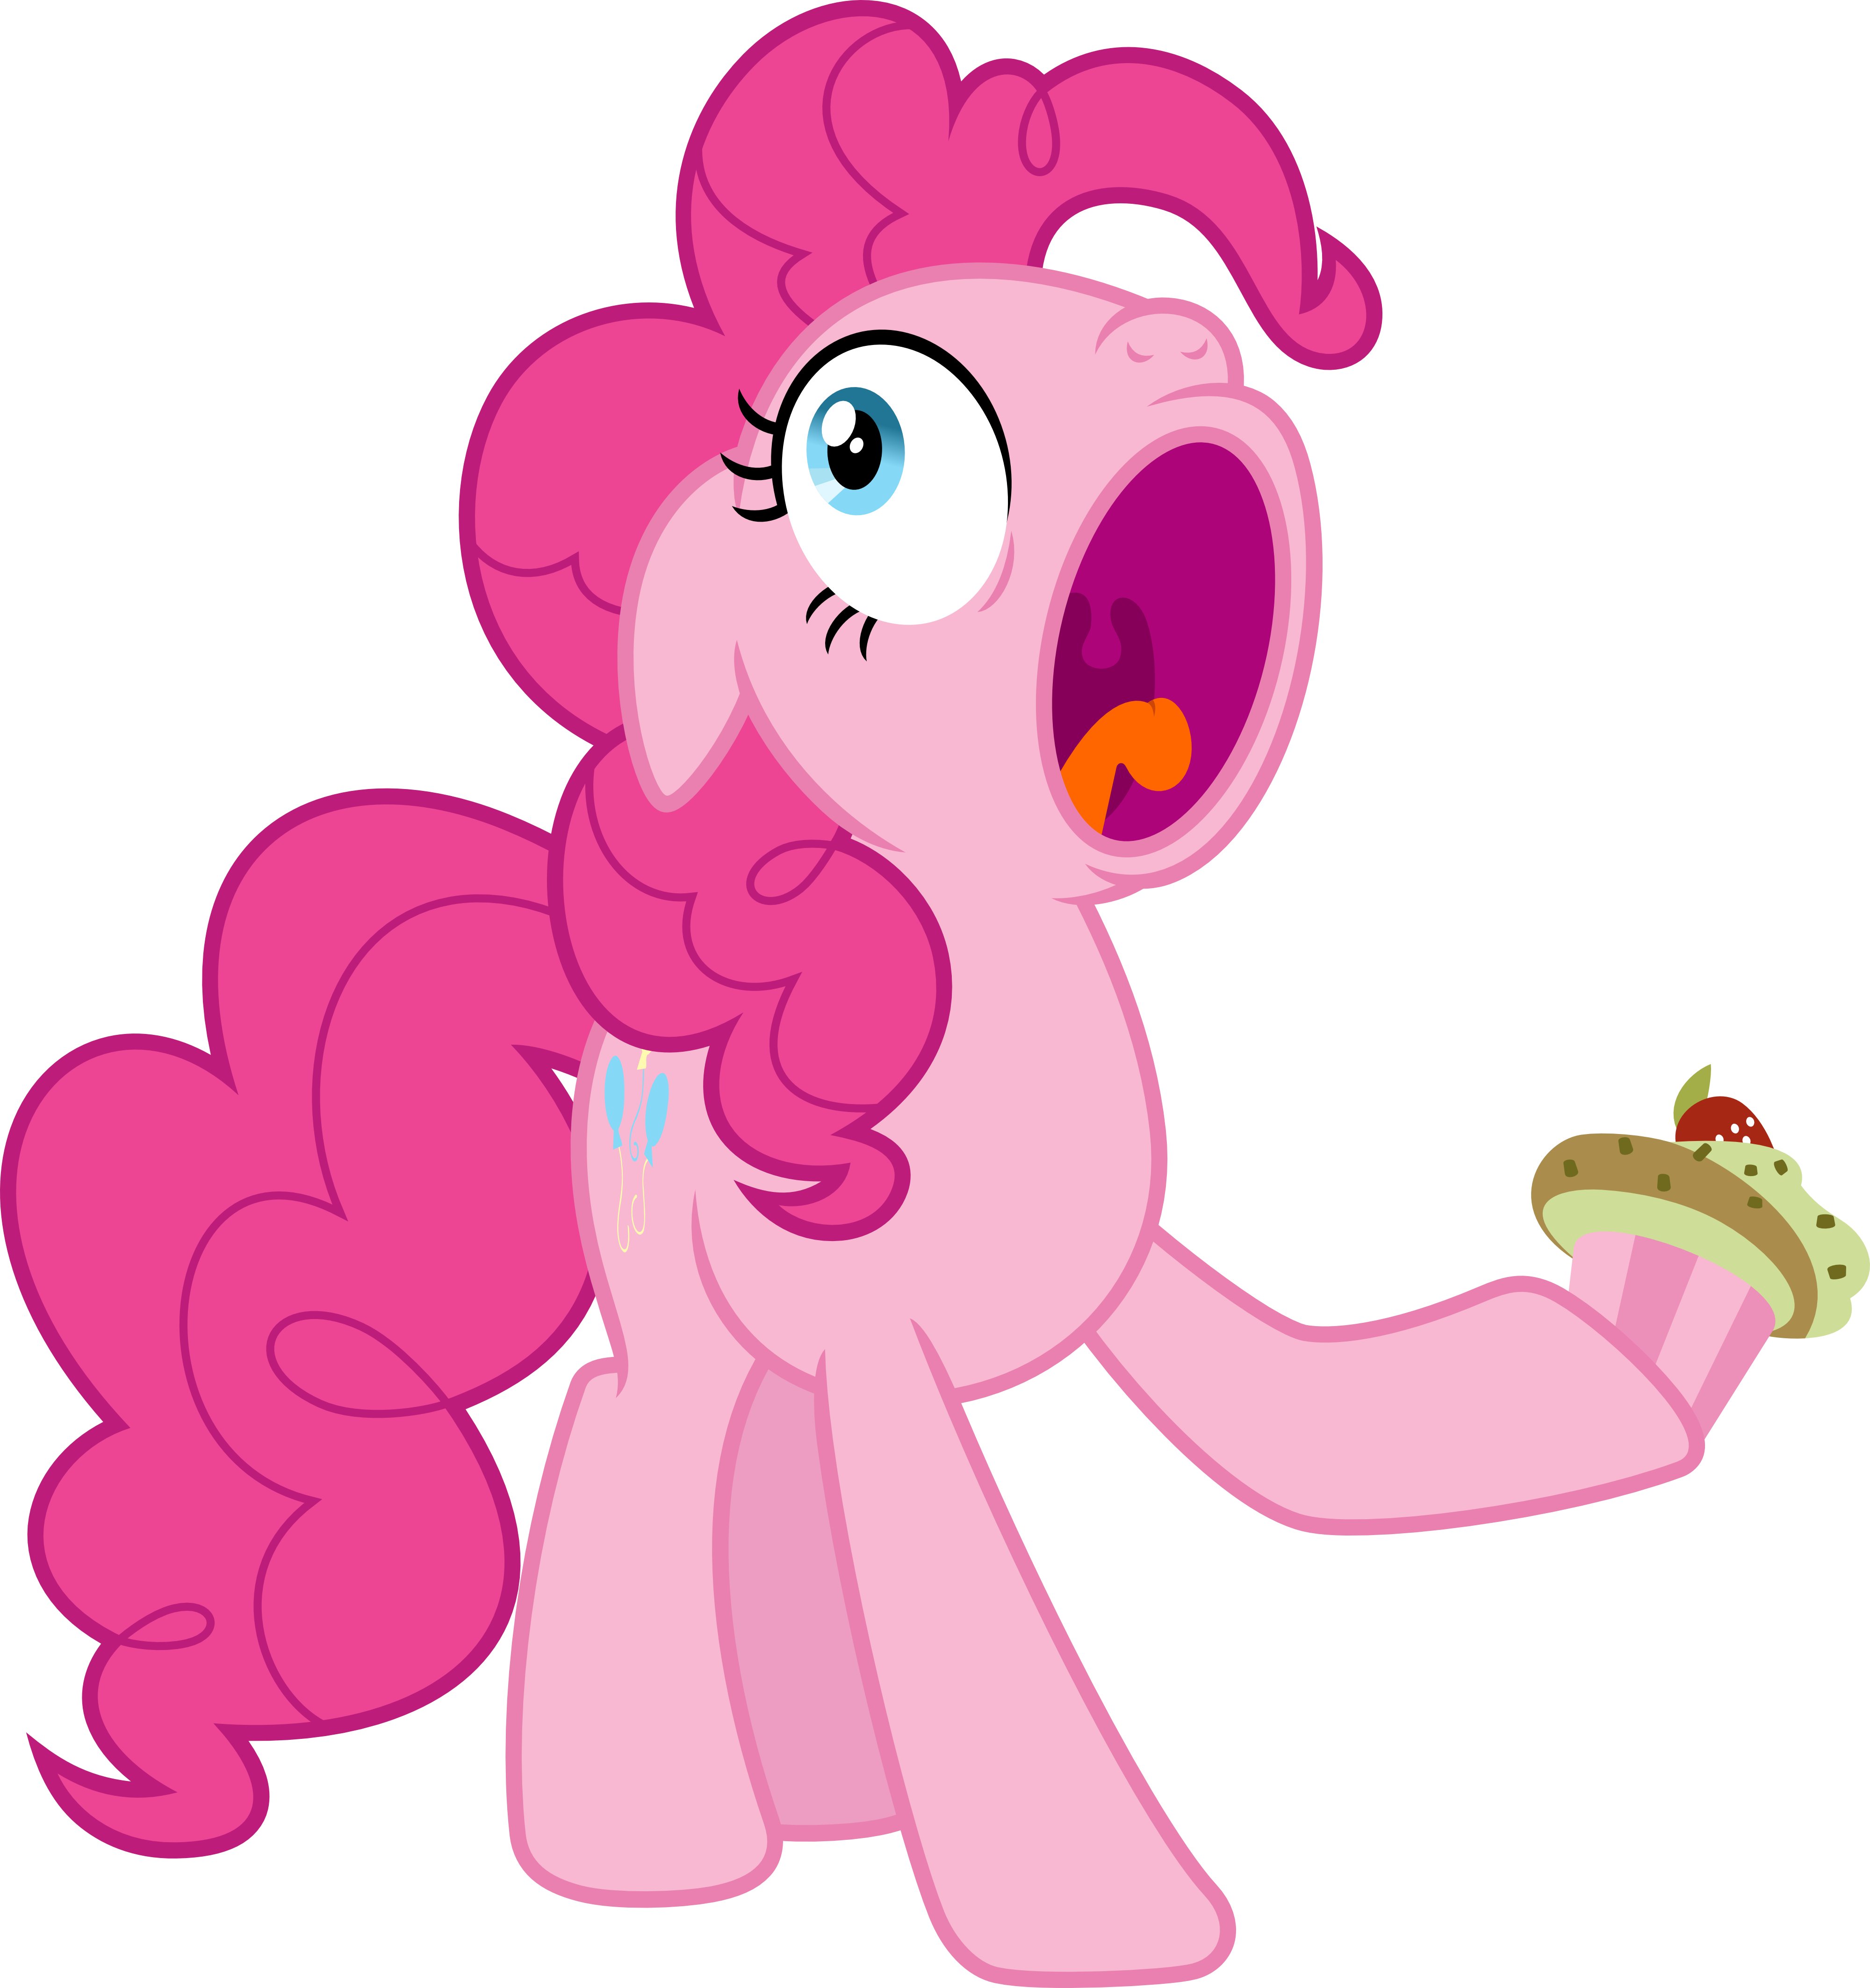 Other Popular Collections - Pinkie Pie With Cupcakes (4000x4253)